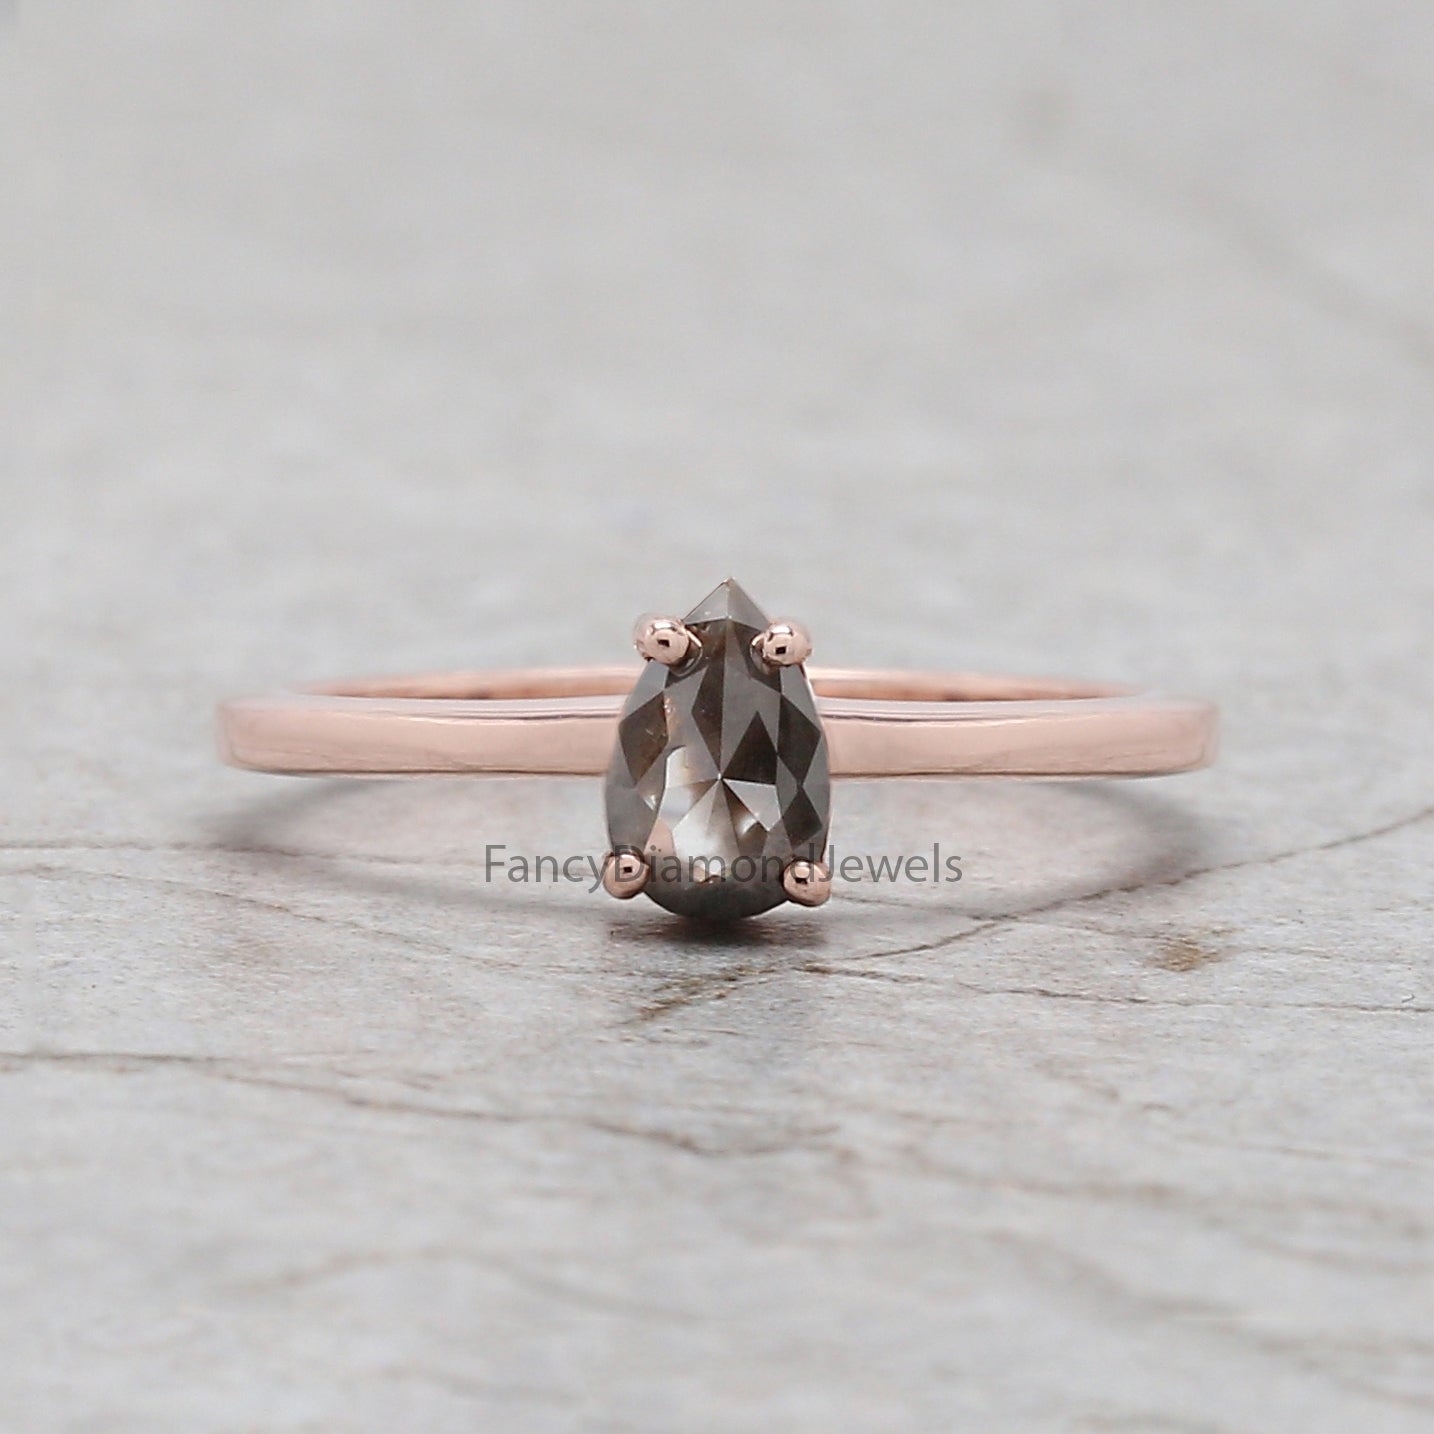 Pear Cut Brown Color Diamond Ring 0.55 Ct 6.39 MM Pear Shape Diamond Ring 14K Solid Rose Gold Silver Pear Engagement Ring Gift For Her QL9598